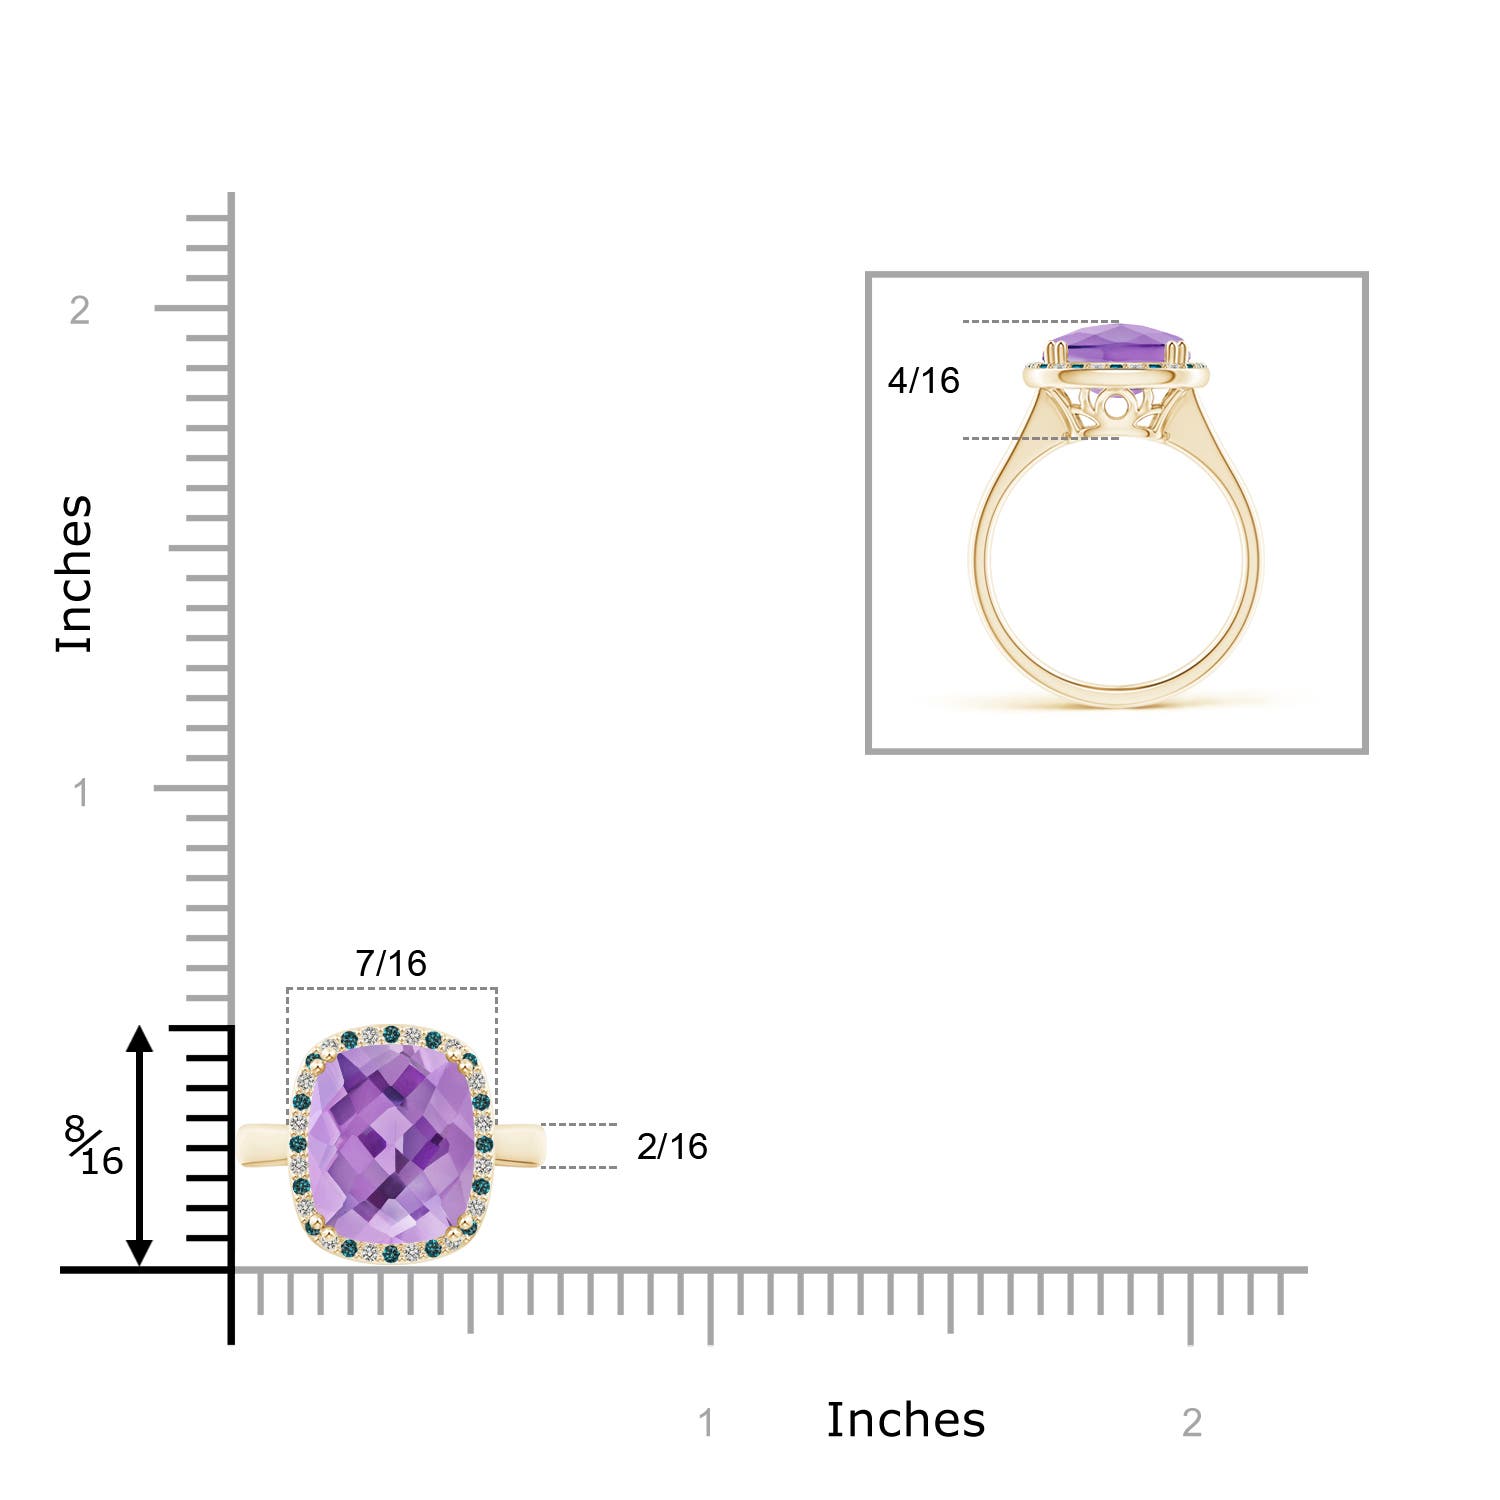 A - Amethyst / 3.14 CT / 14 KT Yellow Gold